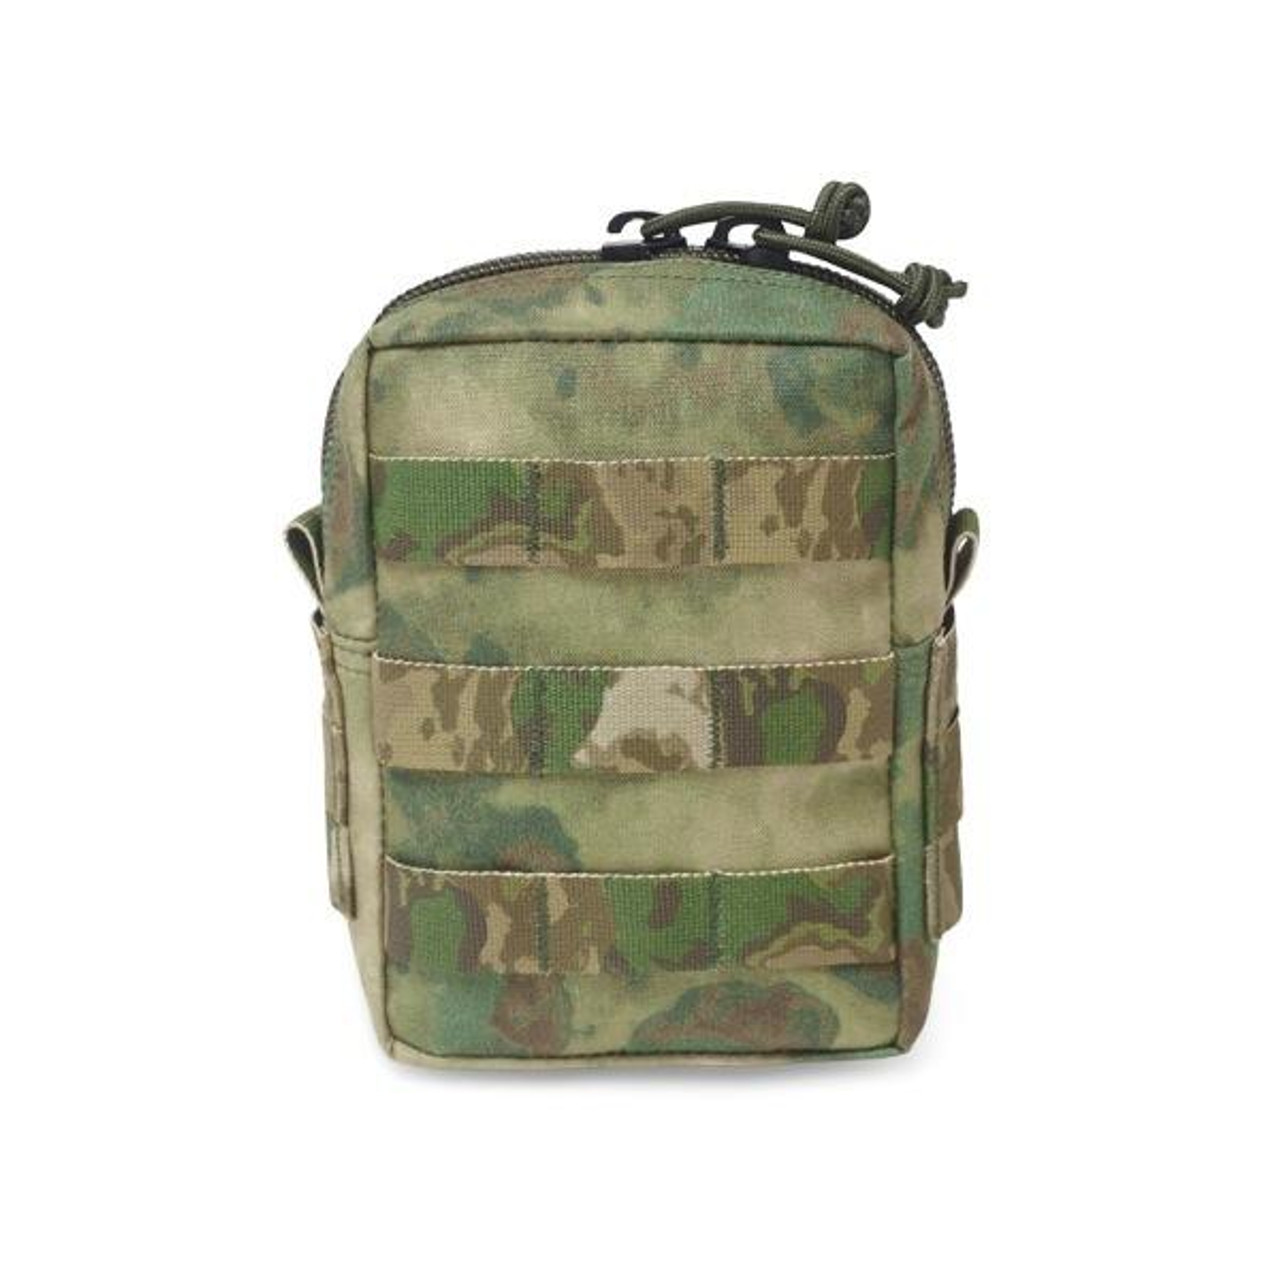 The Small MOLLE Utility Pouch Zipped is made for small...